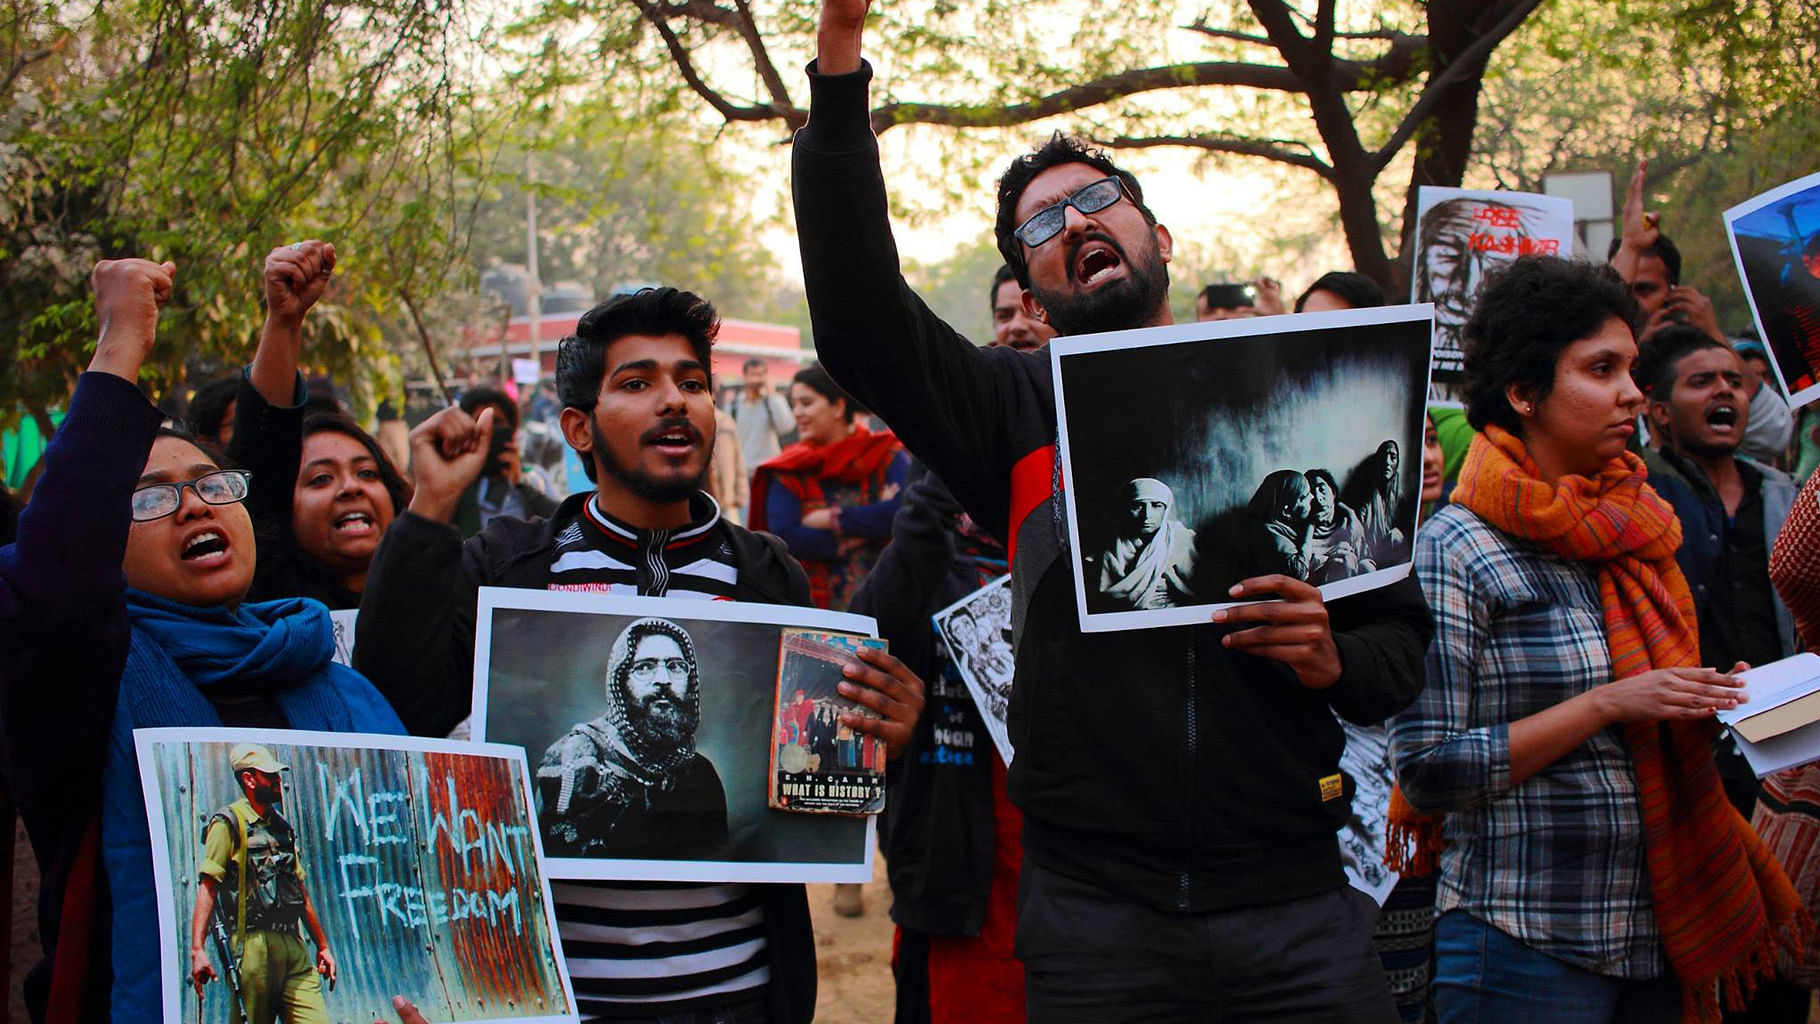 JNU students at the controversial event. (Photo: <a href="https://www.facebook.com/reyaz.hashiya?fref=photo">Reyazul Haque’s Facebook Page</a>)